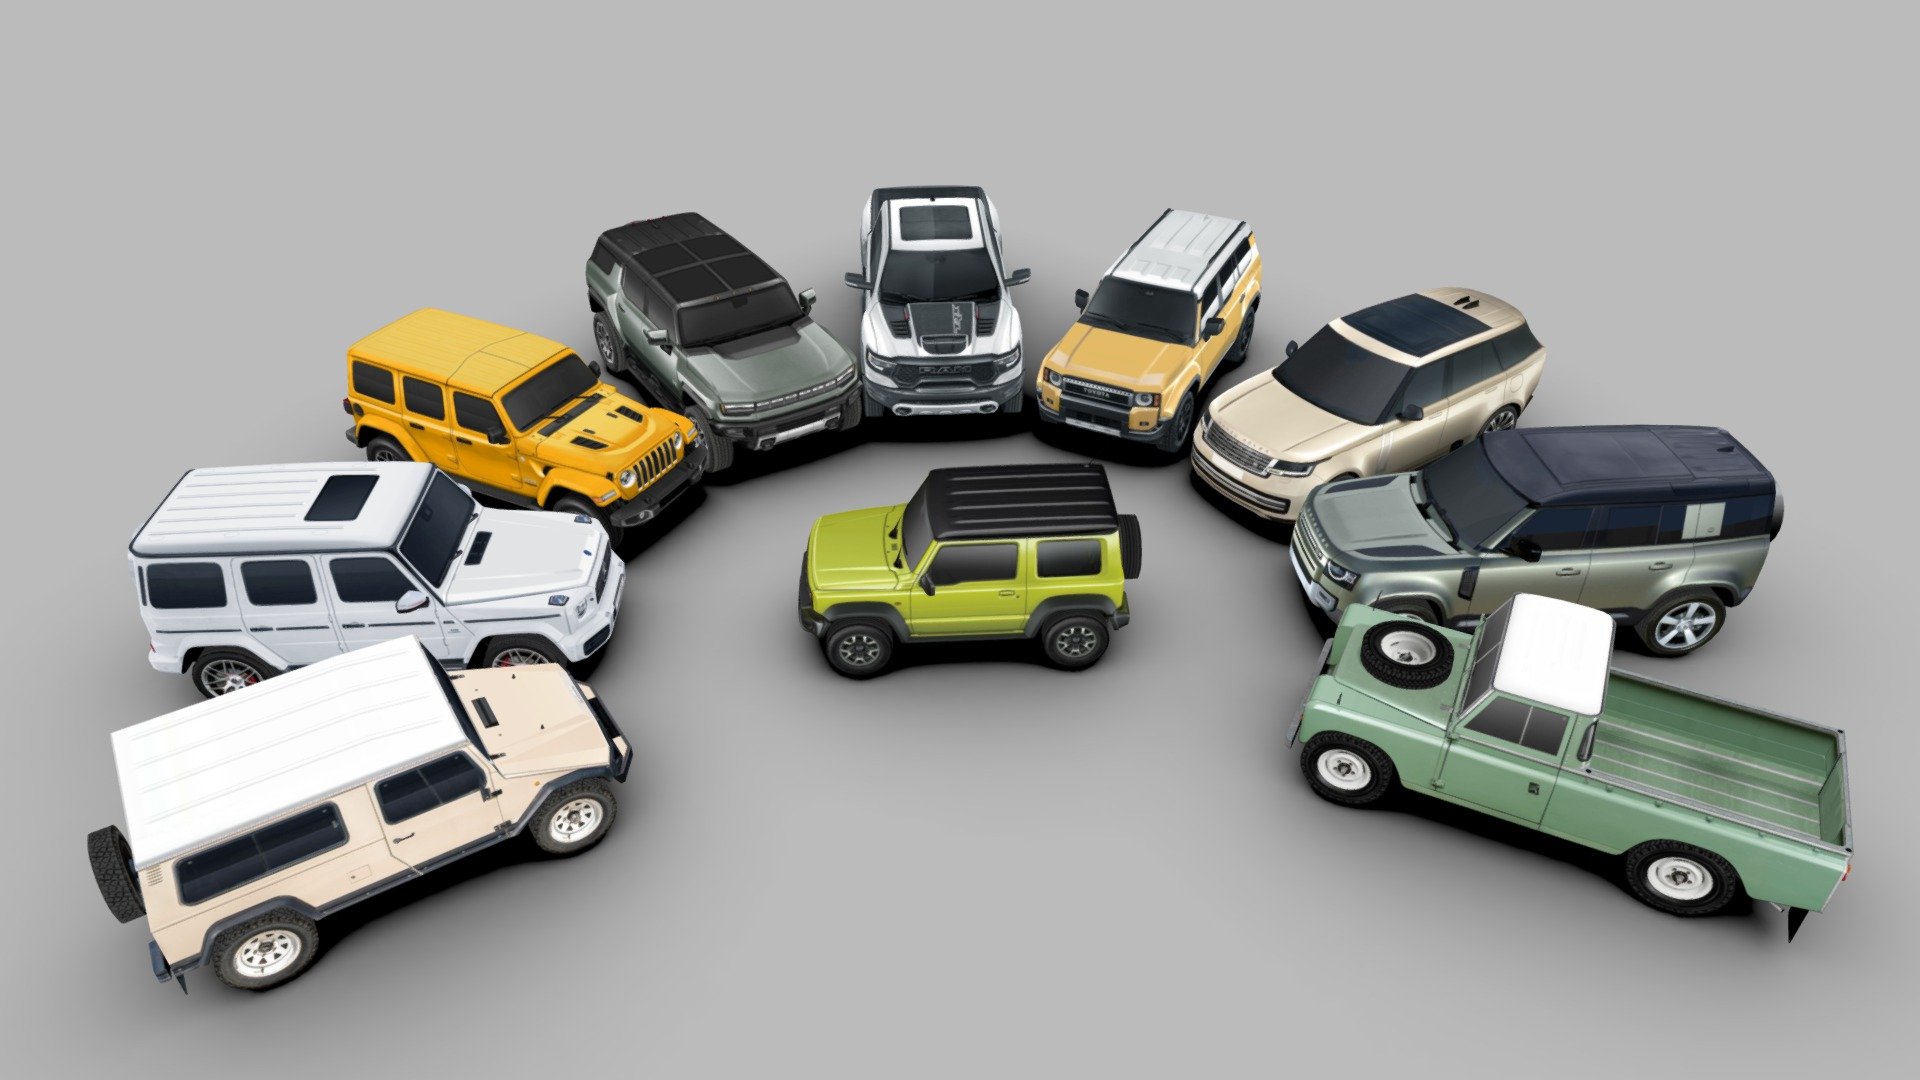 1971 Land Rover Series III;

1990 UMM Alter II;

2019 Mercedes-Benz G63 AMG;

2019 Suzuki Jimny;
-2020 Land Rover Defender 110;

2021 Jeep Wrangler 4xe;

2021 RAM 1500 TRX;

2022 Land Rover Range Rover;

2024 GMC Hummer EV SUV;

2025 Toyota Land Cruiser;

All models are polygonal meshes under 4K triangles (except old Land Rover 5.7K).

The modulation has been simplified in order to reduce the file weight, but it guarantees the essential forms of the real models without being too faceted. Therefore is possible to use it in larger environments, such as parking lots or urban spaces, but also in projects that require more detail.

Low-poly models, on full-scale, with real photos textures (single 2048 x 2048 png texture each one), very light and fast to render.

Package includes 5 file formats and texture (3ds, fbx, dae, obj and skp)

Hope you enjoy it.

José Bronze - 10 Off-Road cars Pack 1 - Buy Royalty Free 3D model by Jose Bronze (@pinceladas3d) 3d model